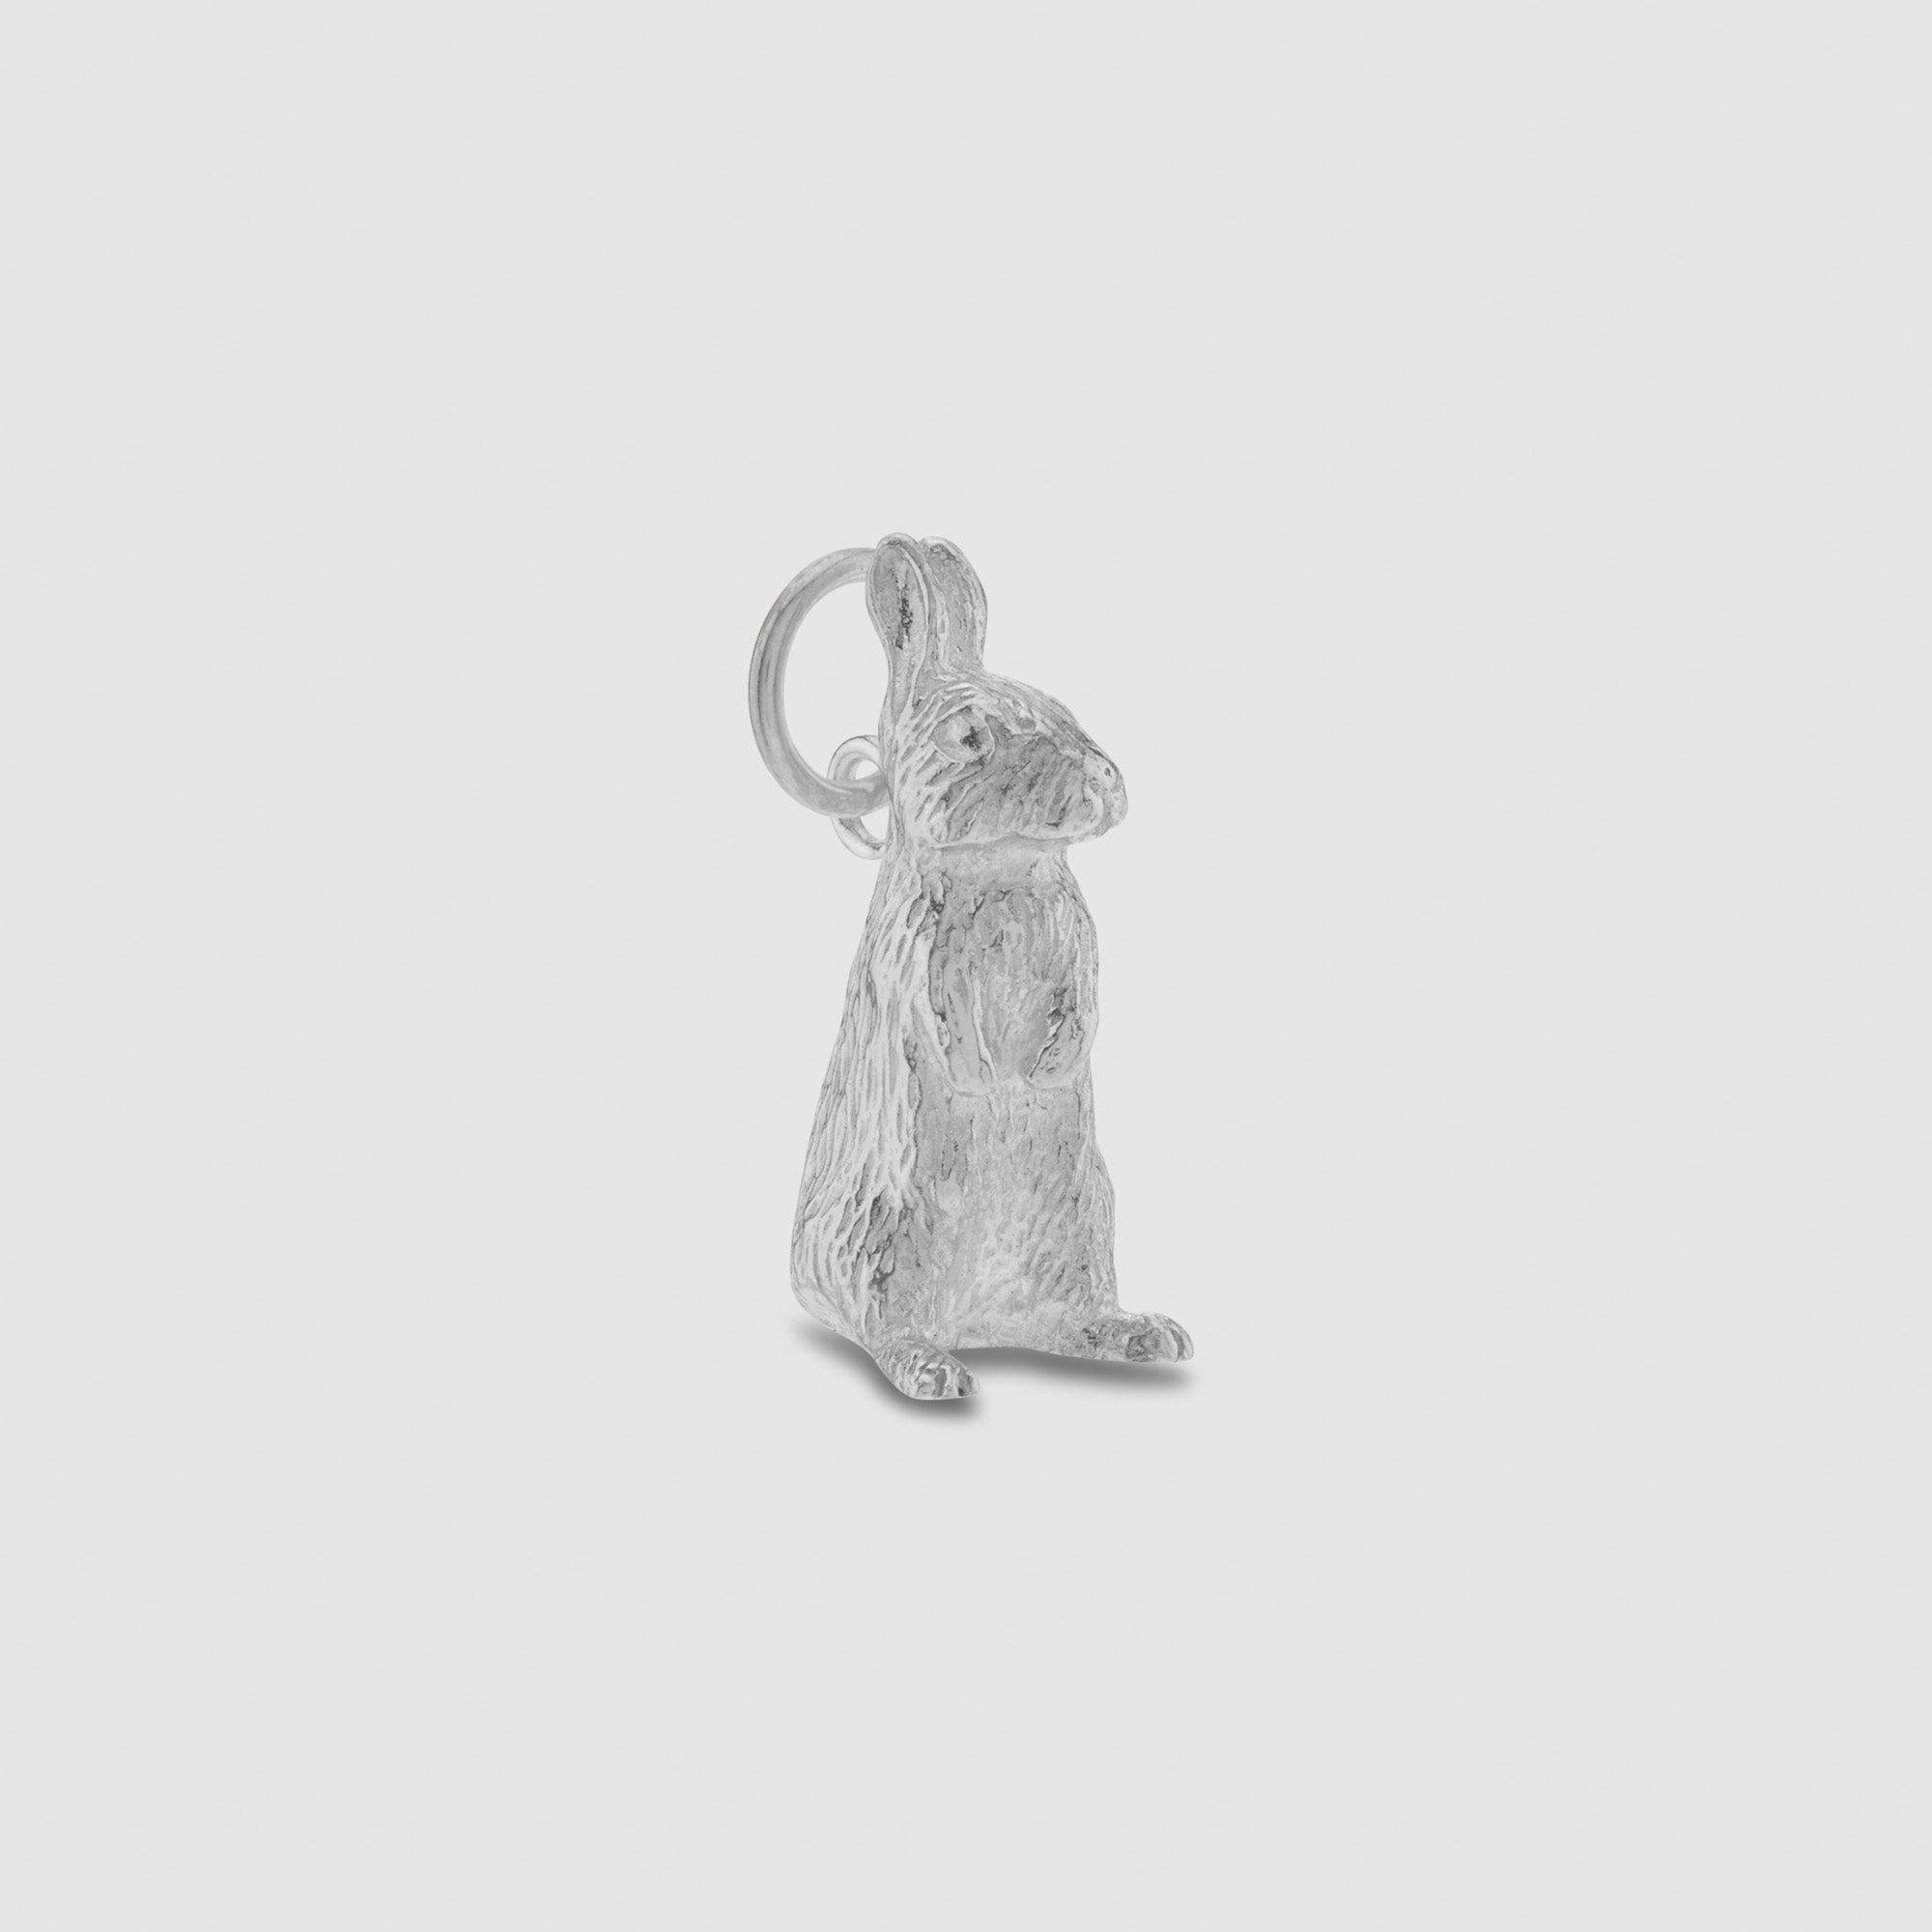 Bunney Standing Rabbit Charm Silver by ANDREW BUNNEY